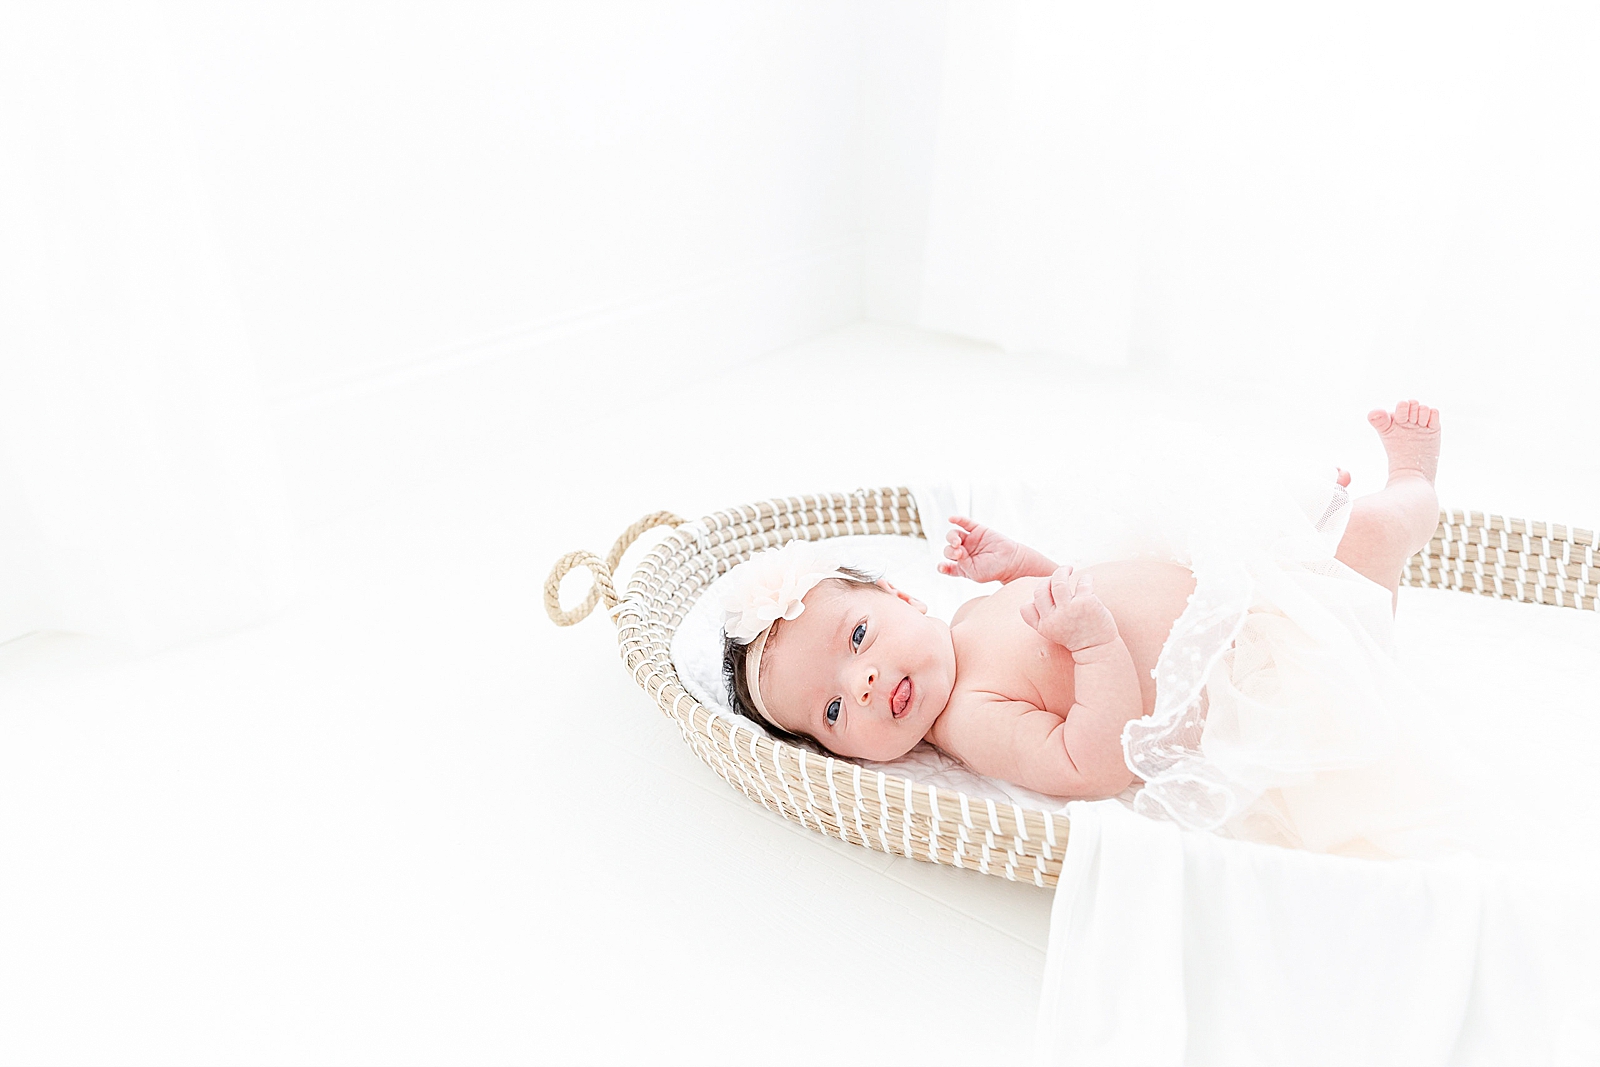 Newborn in Moses basket looking at the camera wearing a tutu and bow sticking her tongue out with feet up in the air